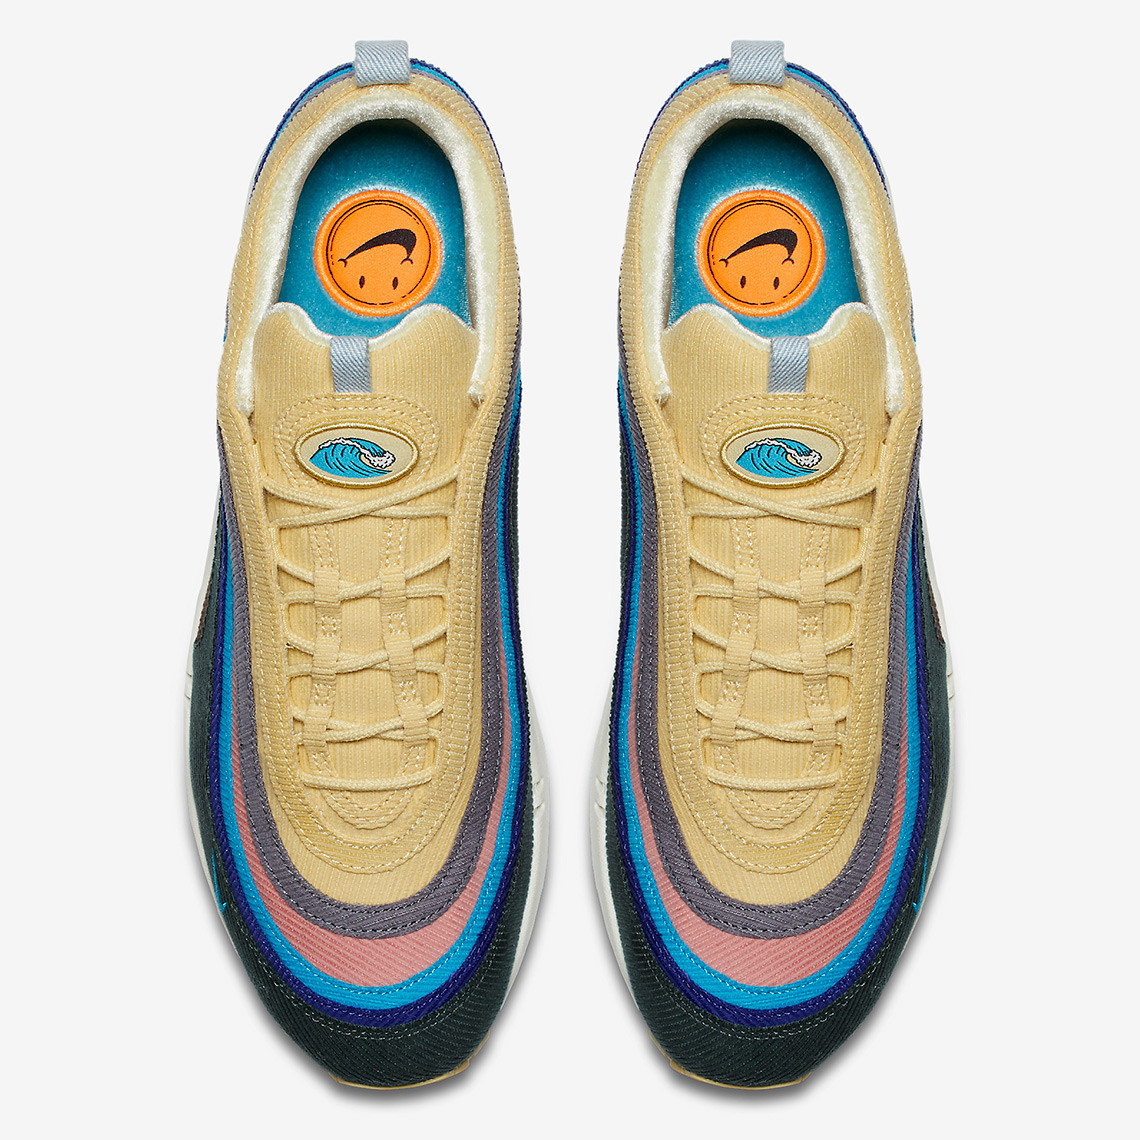 The Super-Retro Sean Wotherspoon X Nike Air Max 97/1 Drops On Air Max Day